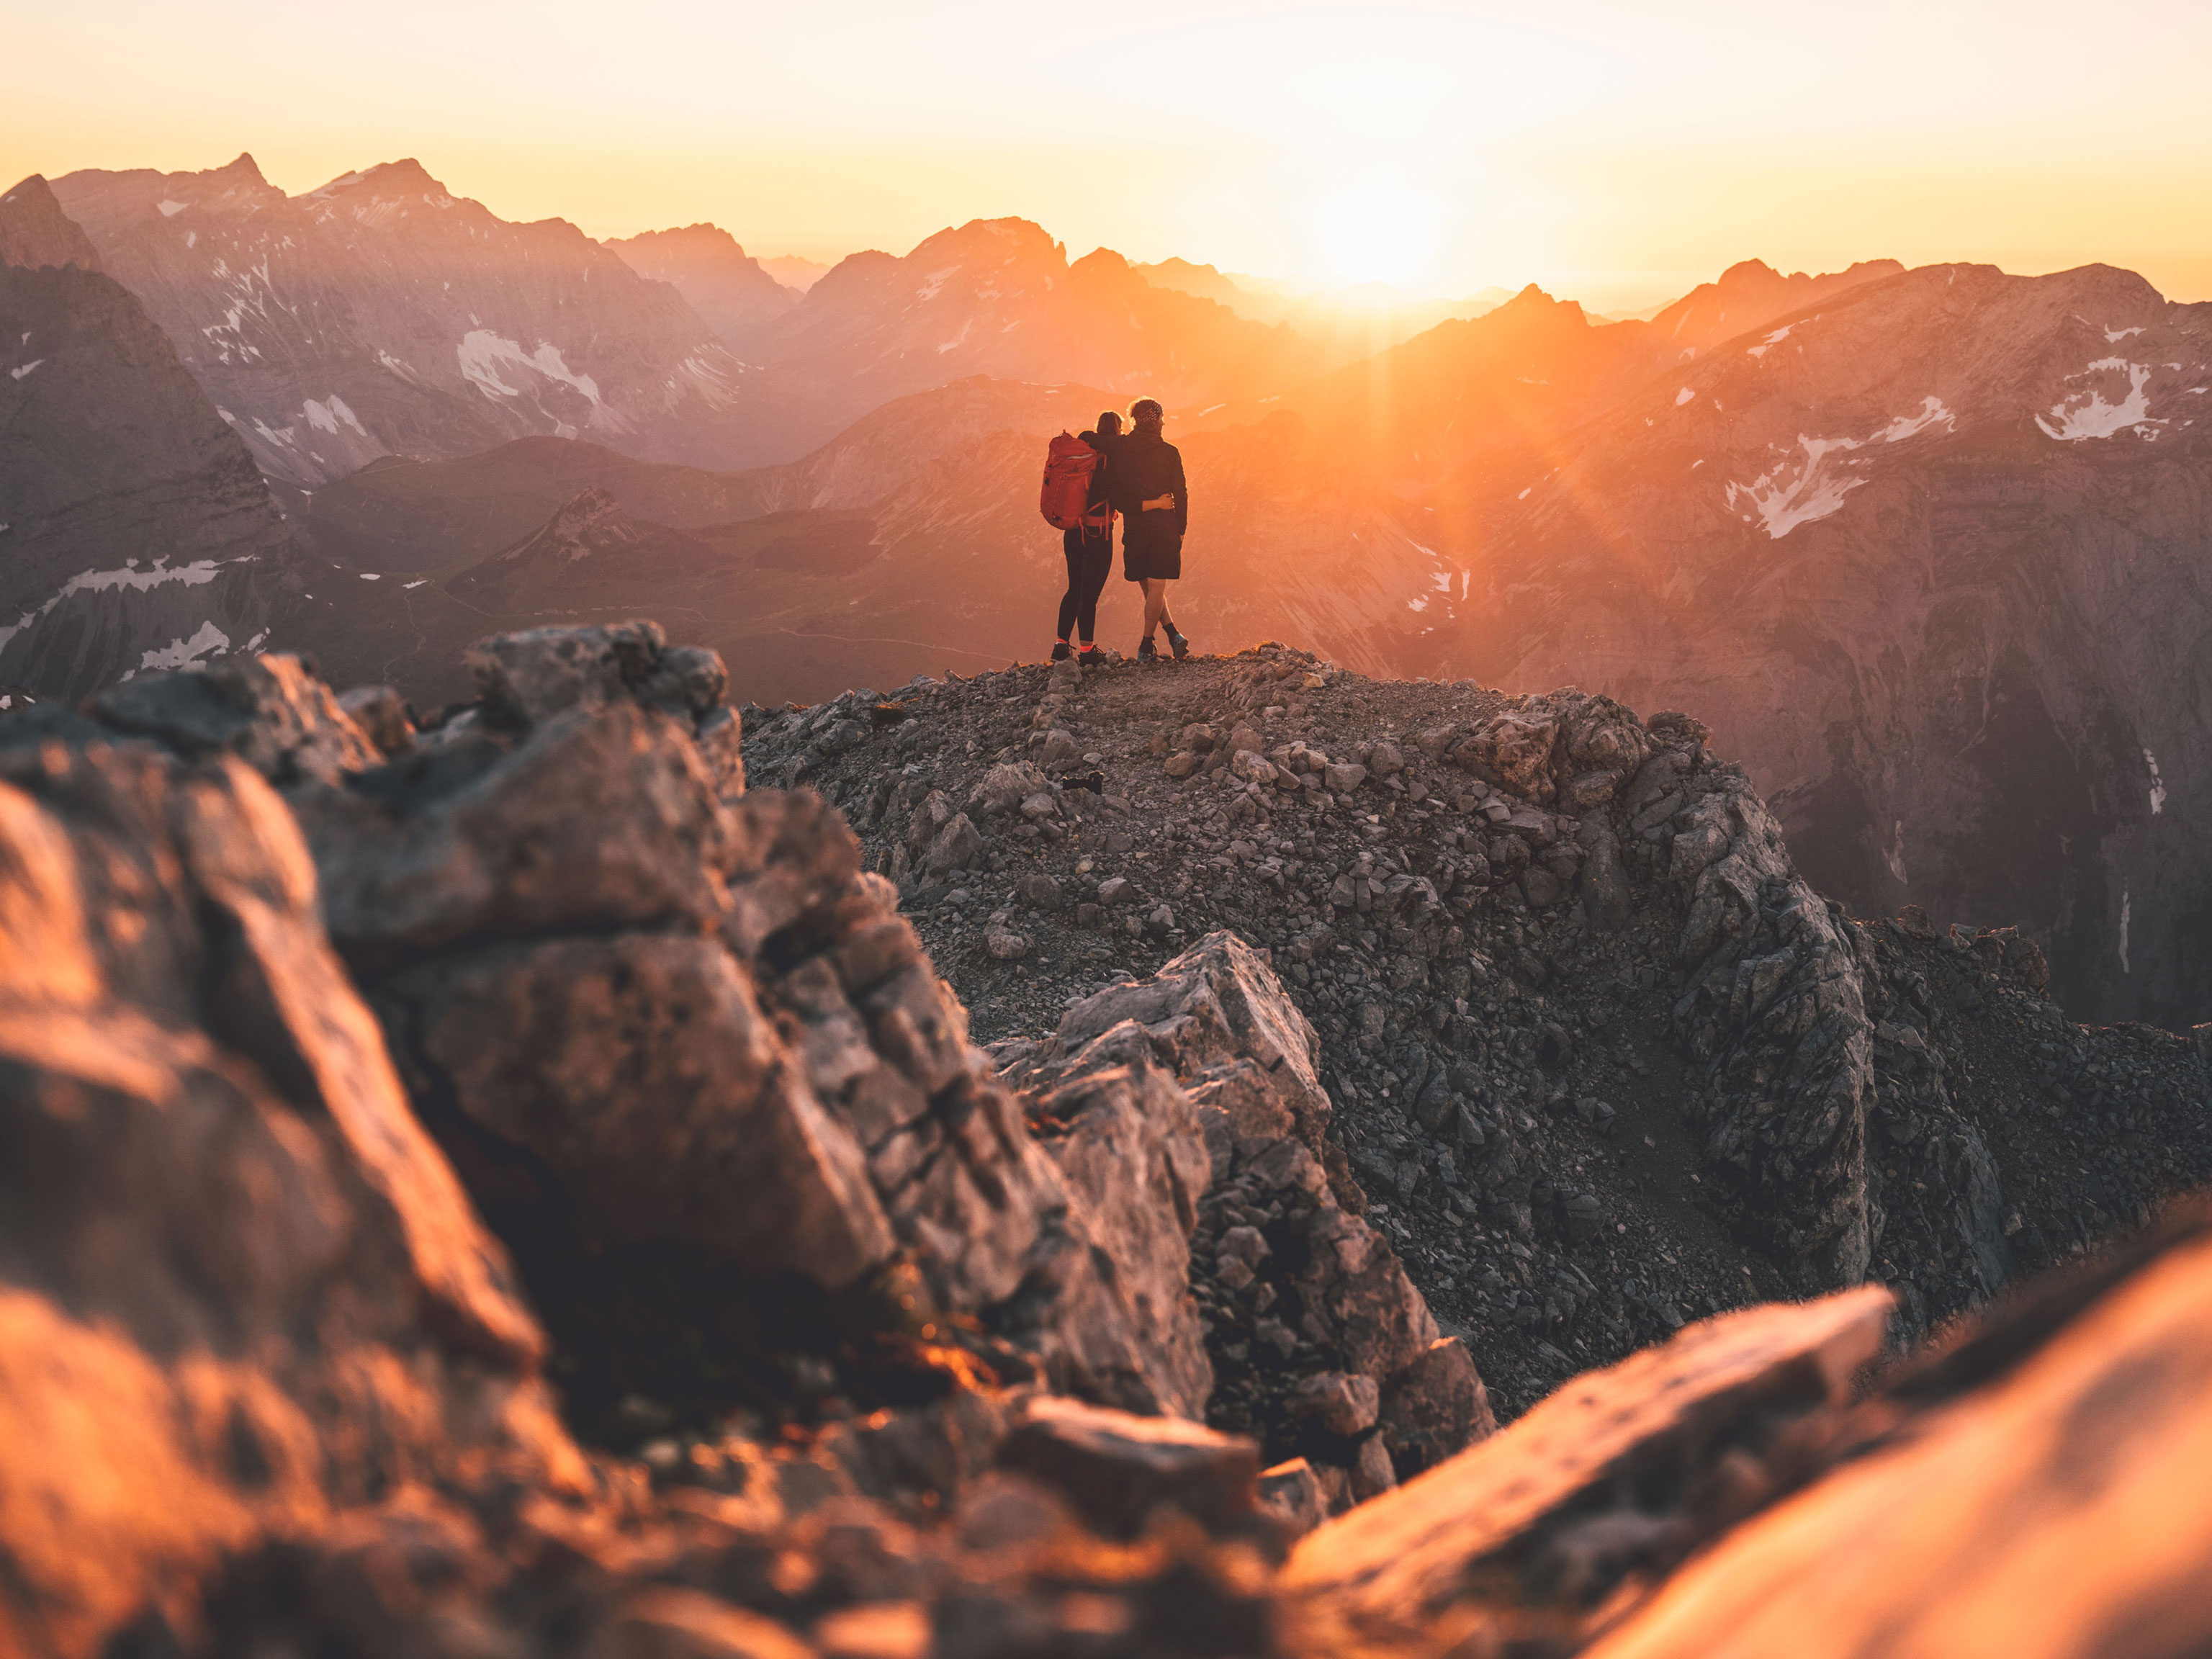 Two mountaineers watching the sunset from a cliff top